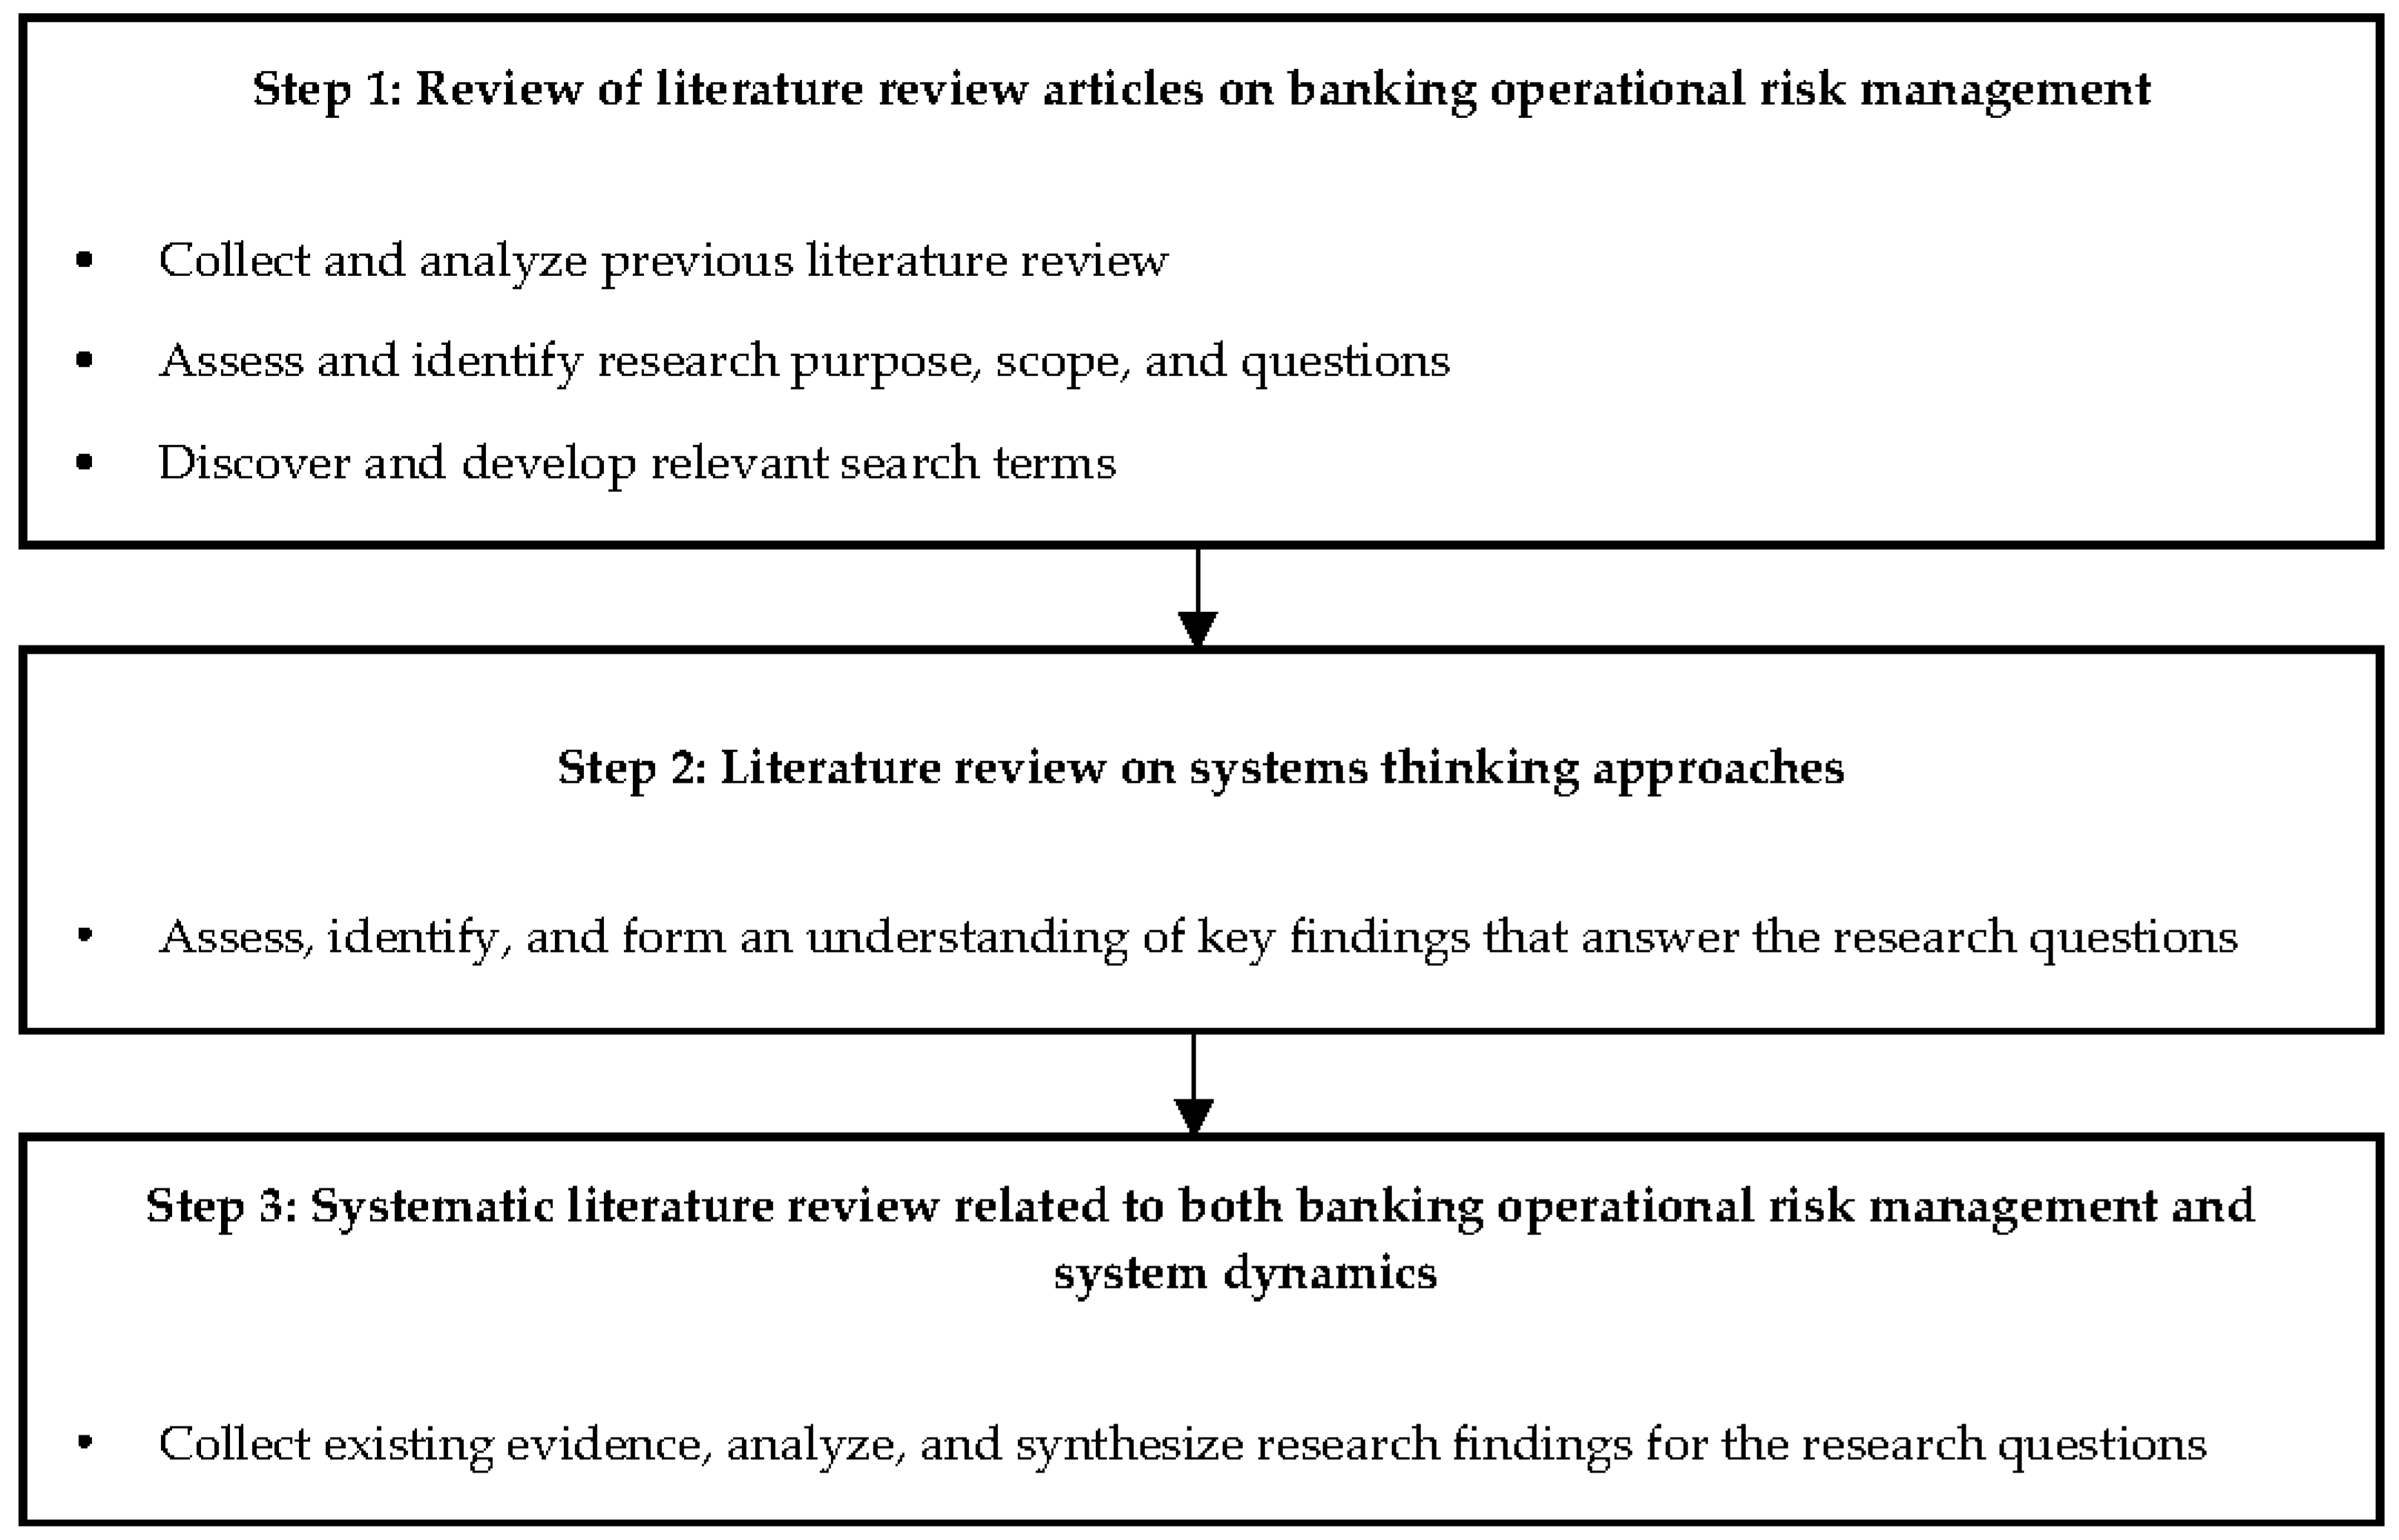 empirical literature review in risk management at it company